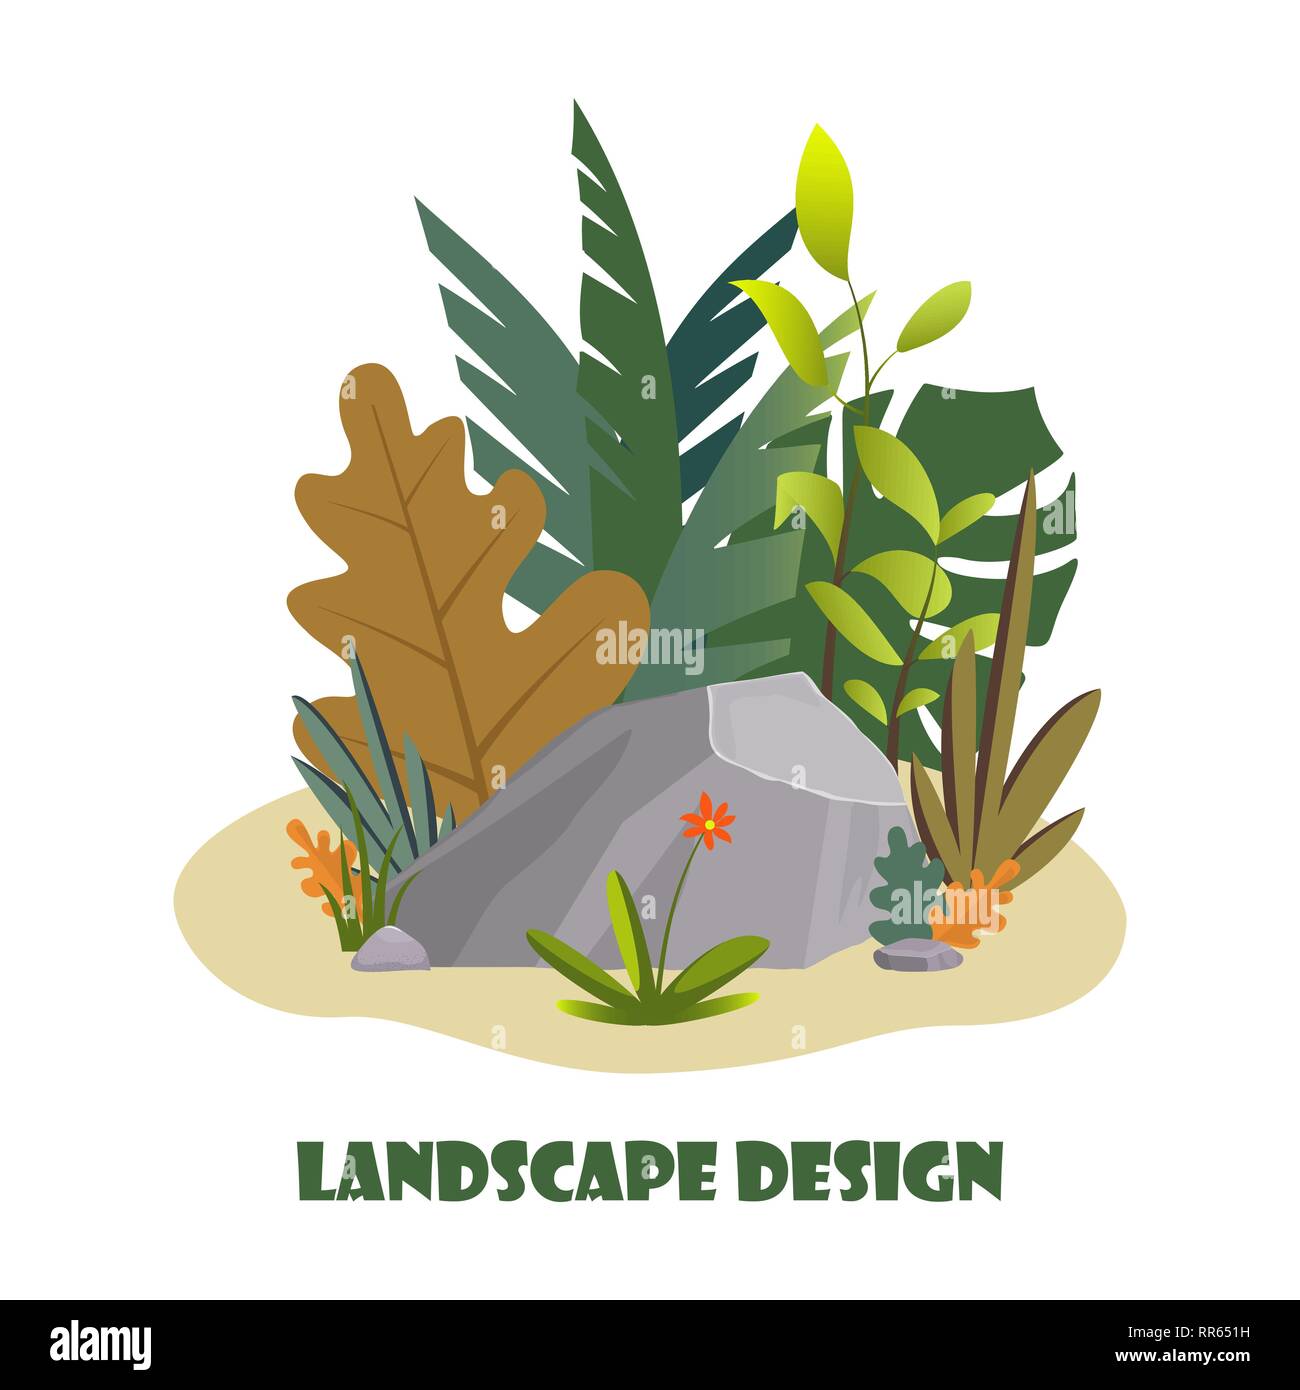 Landscape design composition with plant and stones. Cute floral composition for greeting card, banner, flyer, app, website on ecological, botanic, lan Stock Vector